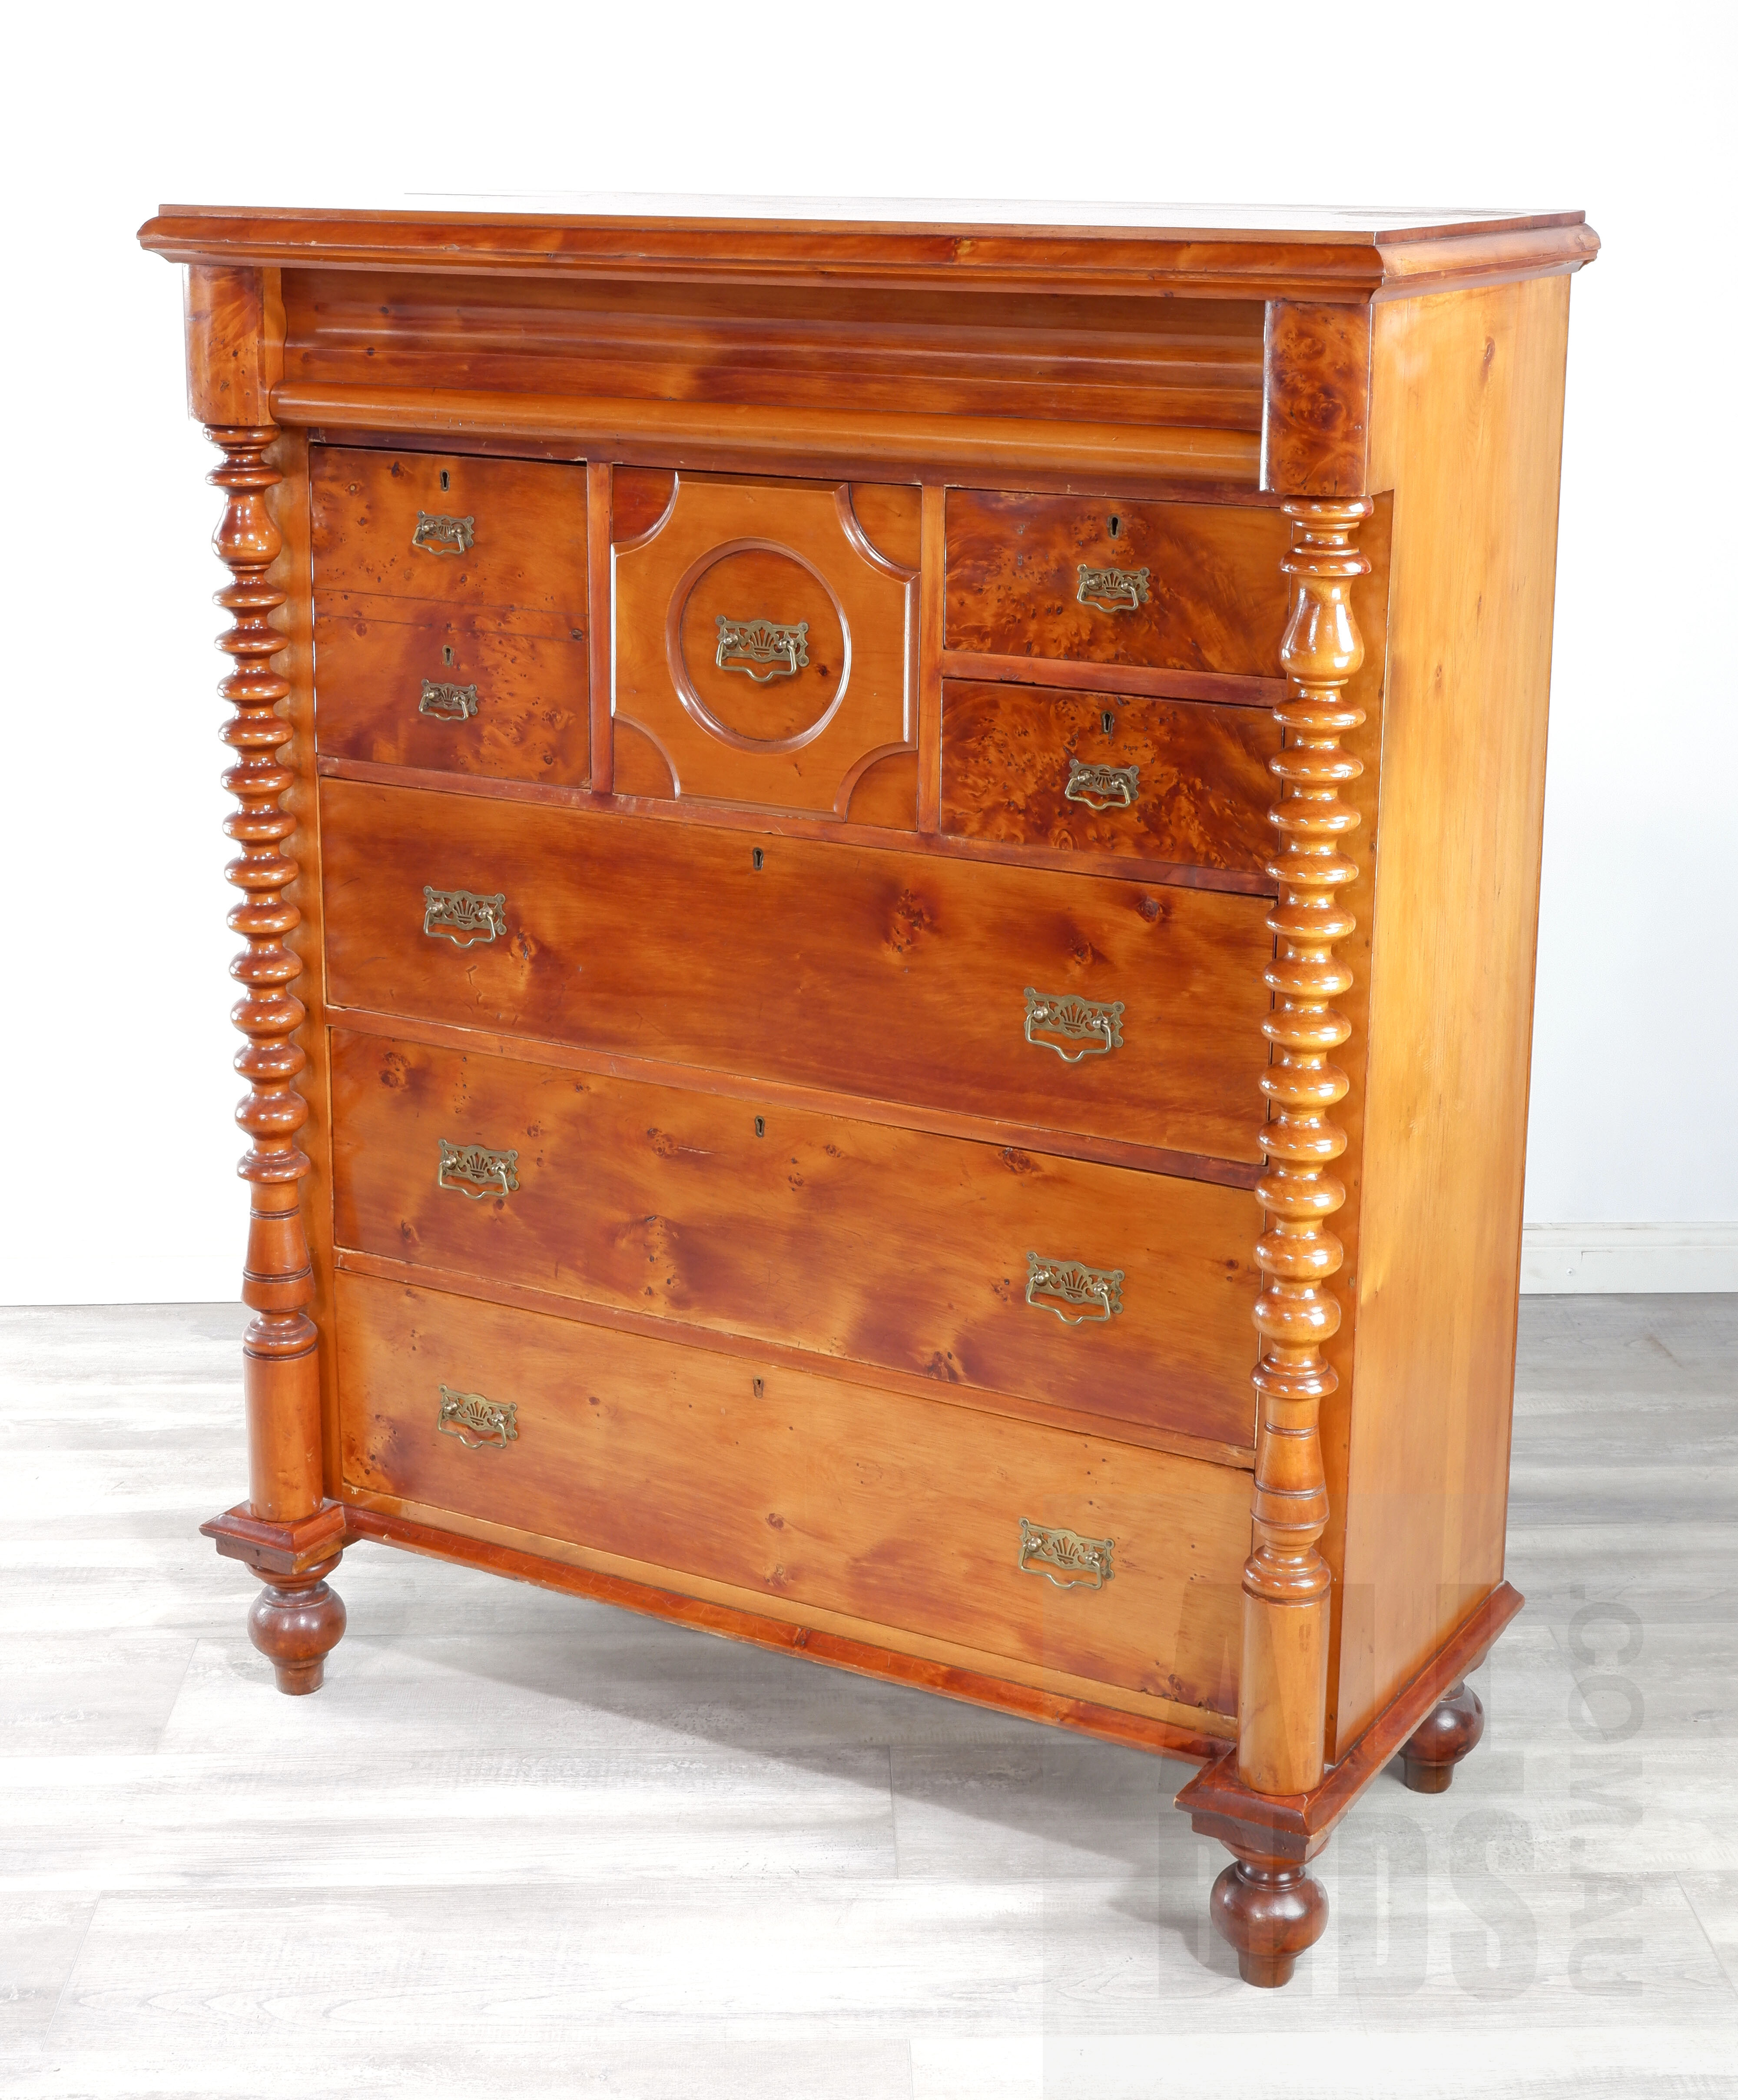 'Antique Australian Huon Pine Chest of Drawers, Late 19th Century'